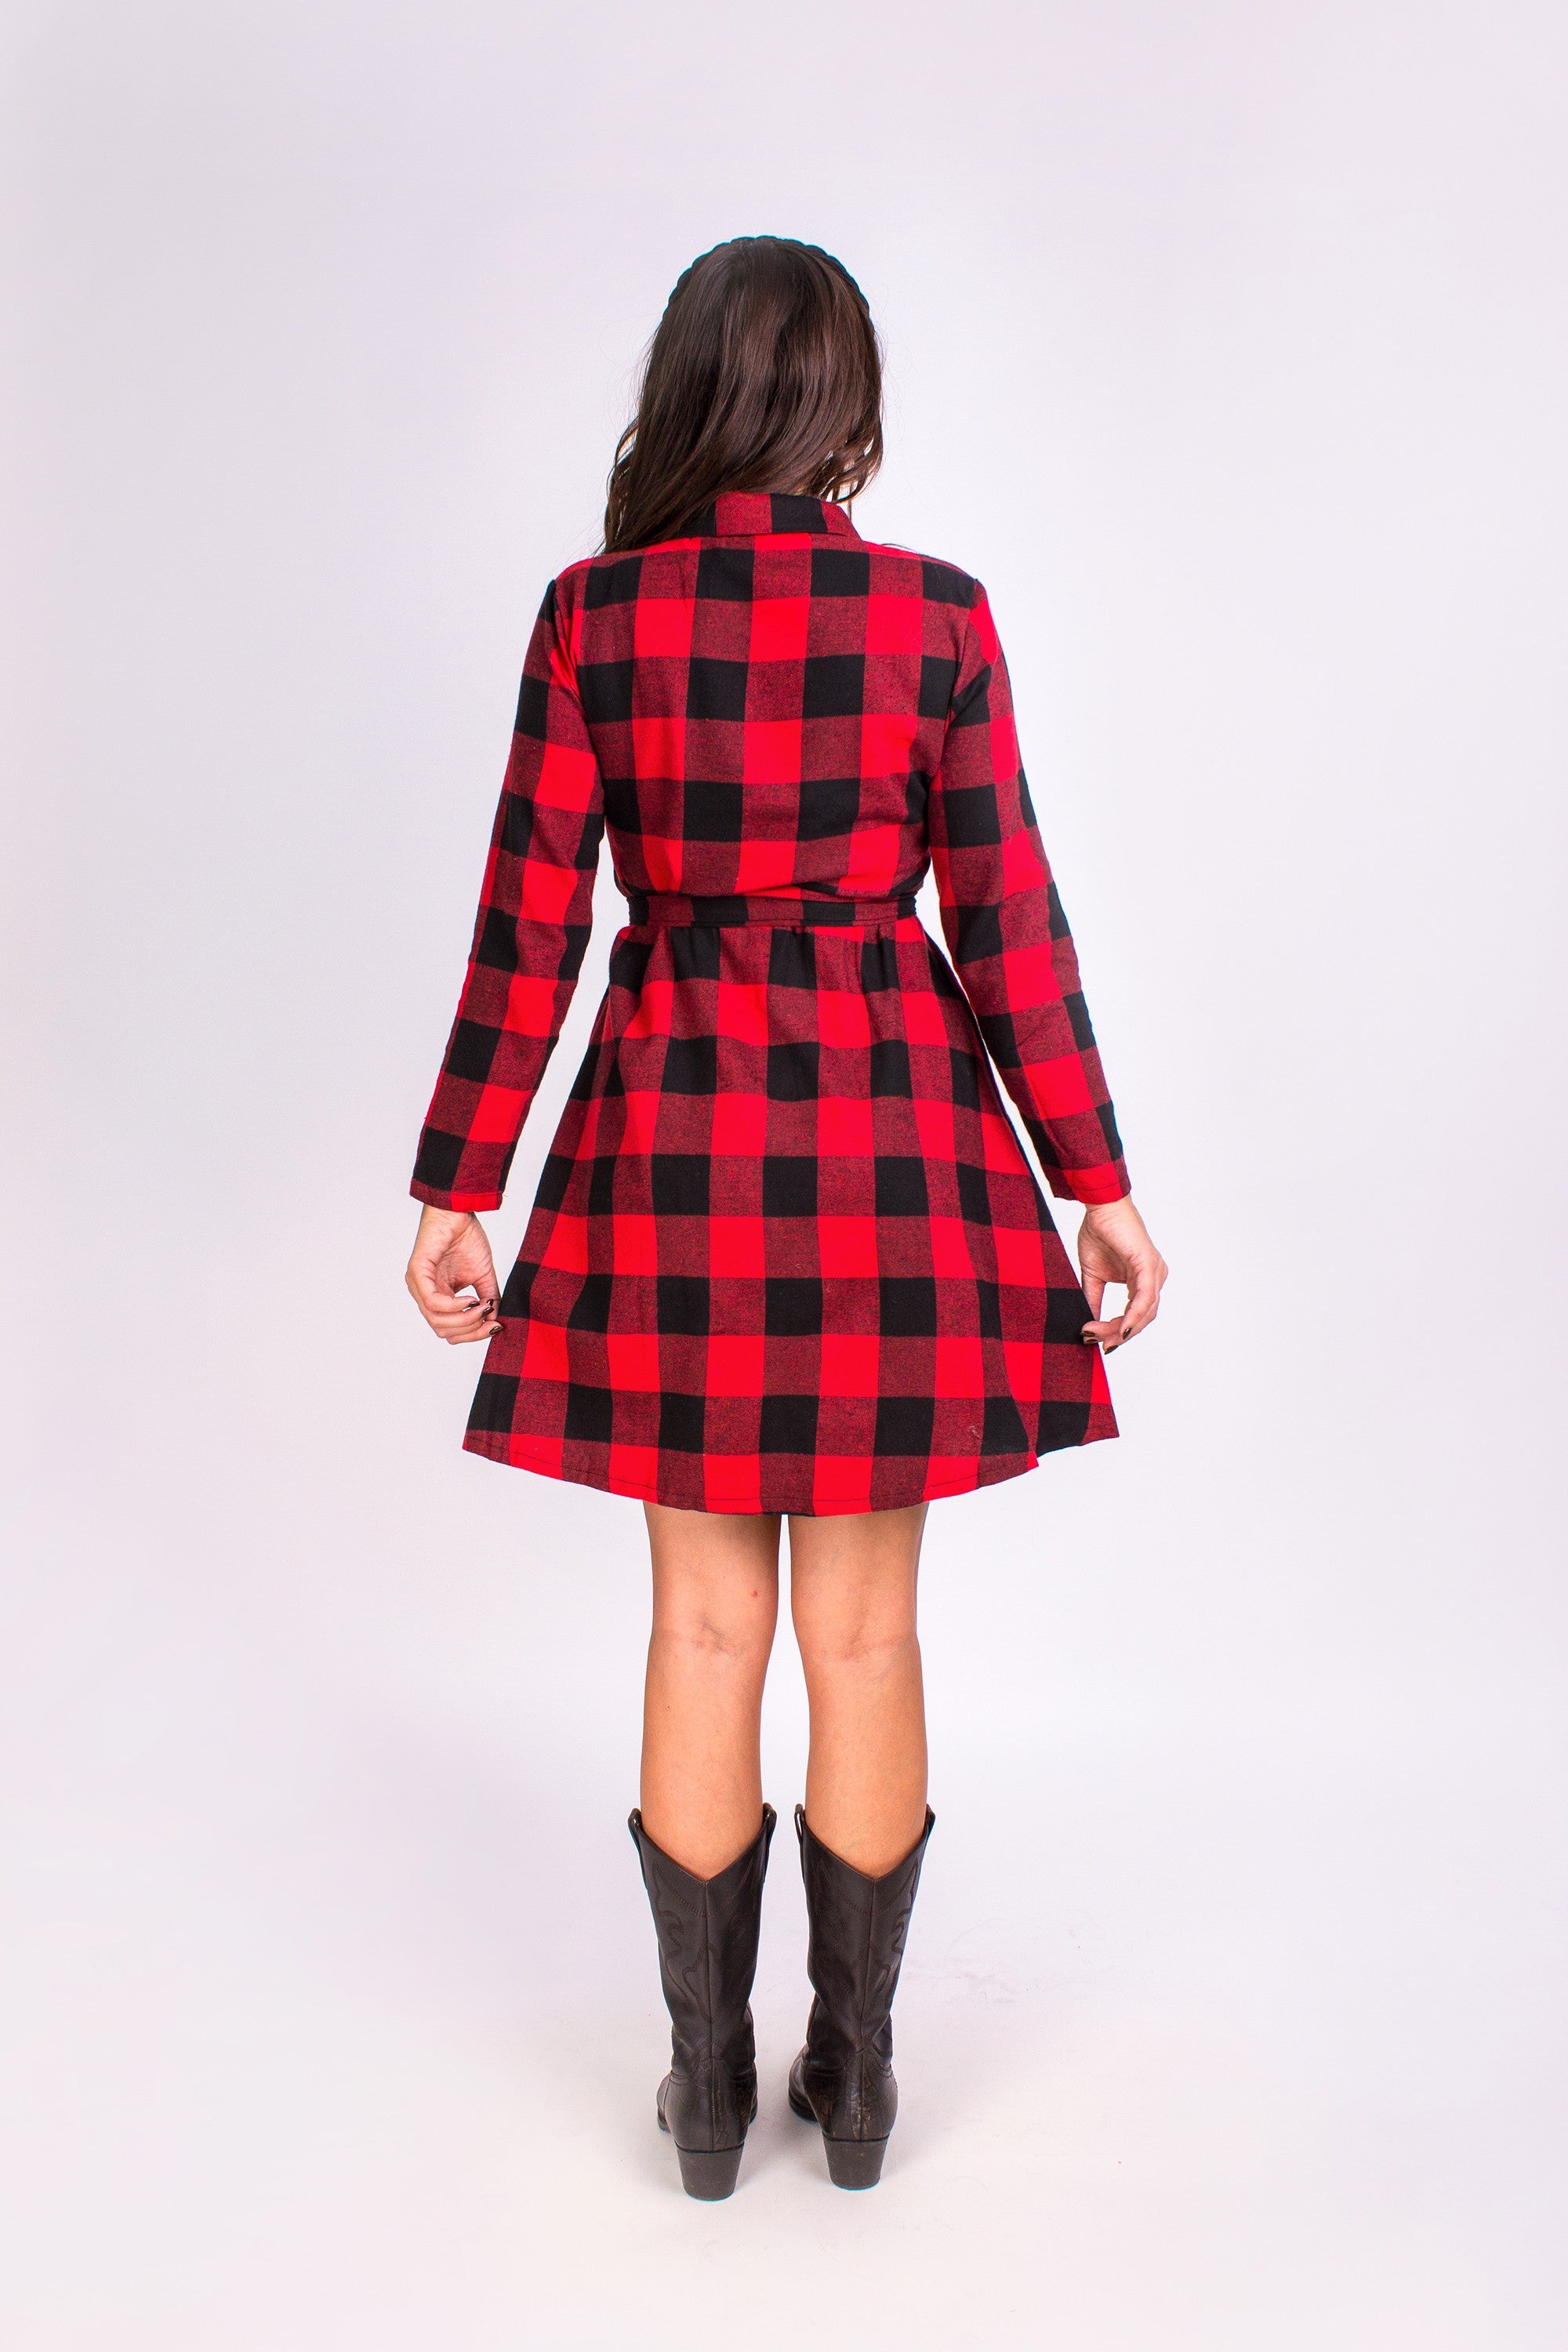 Christmas Red Plaid Family Matching Long-sleeve Dresses and Shirts Sets